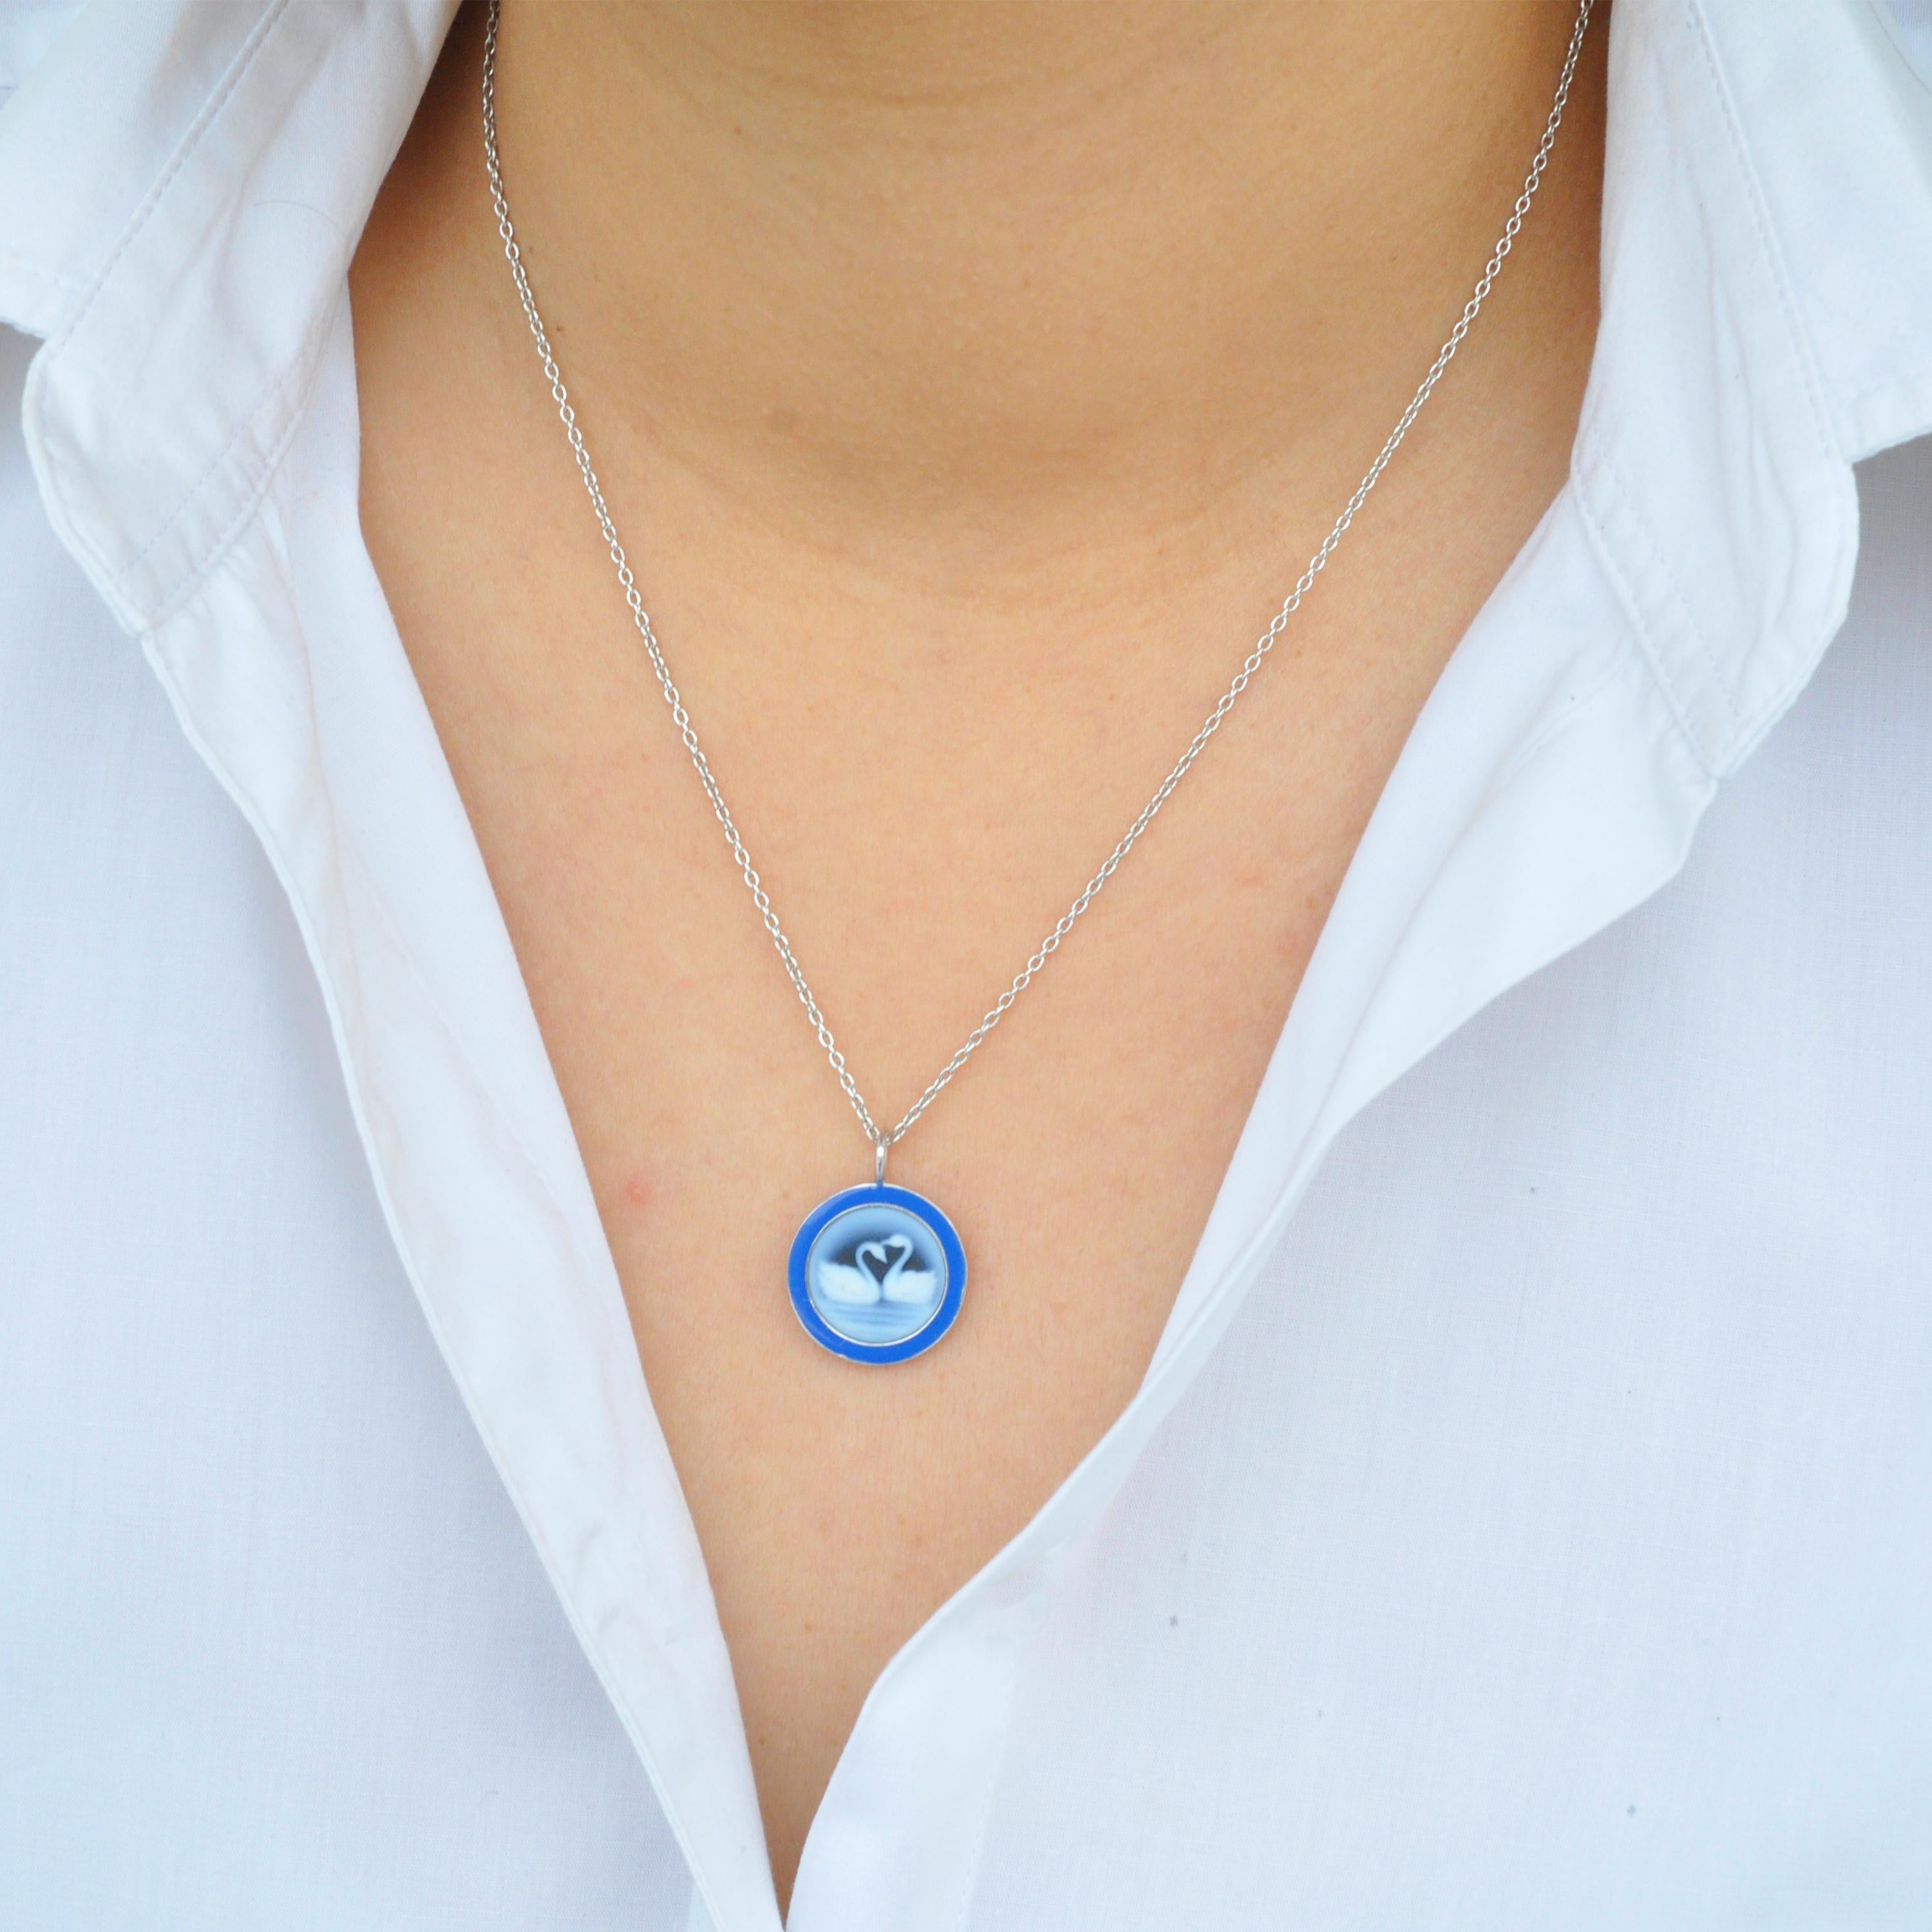 925 Sterling Silver Blue Enamel Agate Swan Cameo Carving Pendant

Celebrating bliss is this beautiful 18 karat gold swan cameo blue enamel pendant necklace. The cameo is intricately carved in the shape of two love swans on the relief of natural